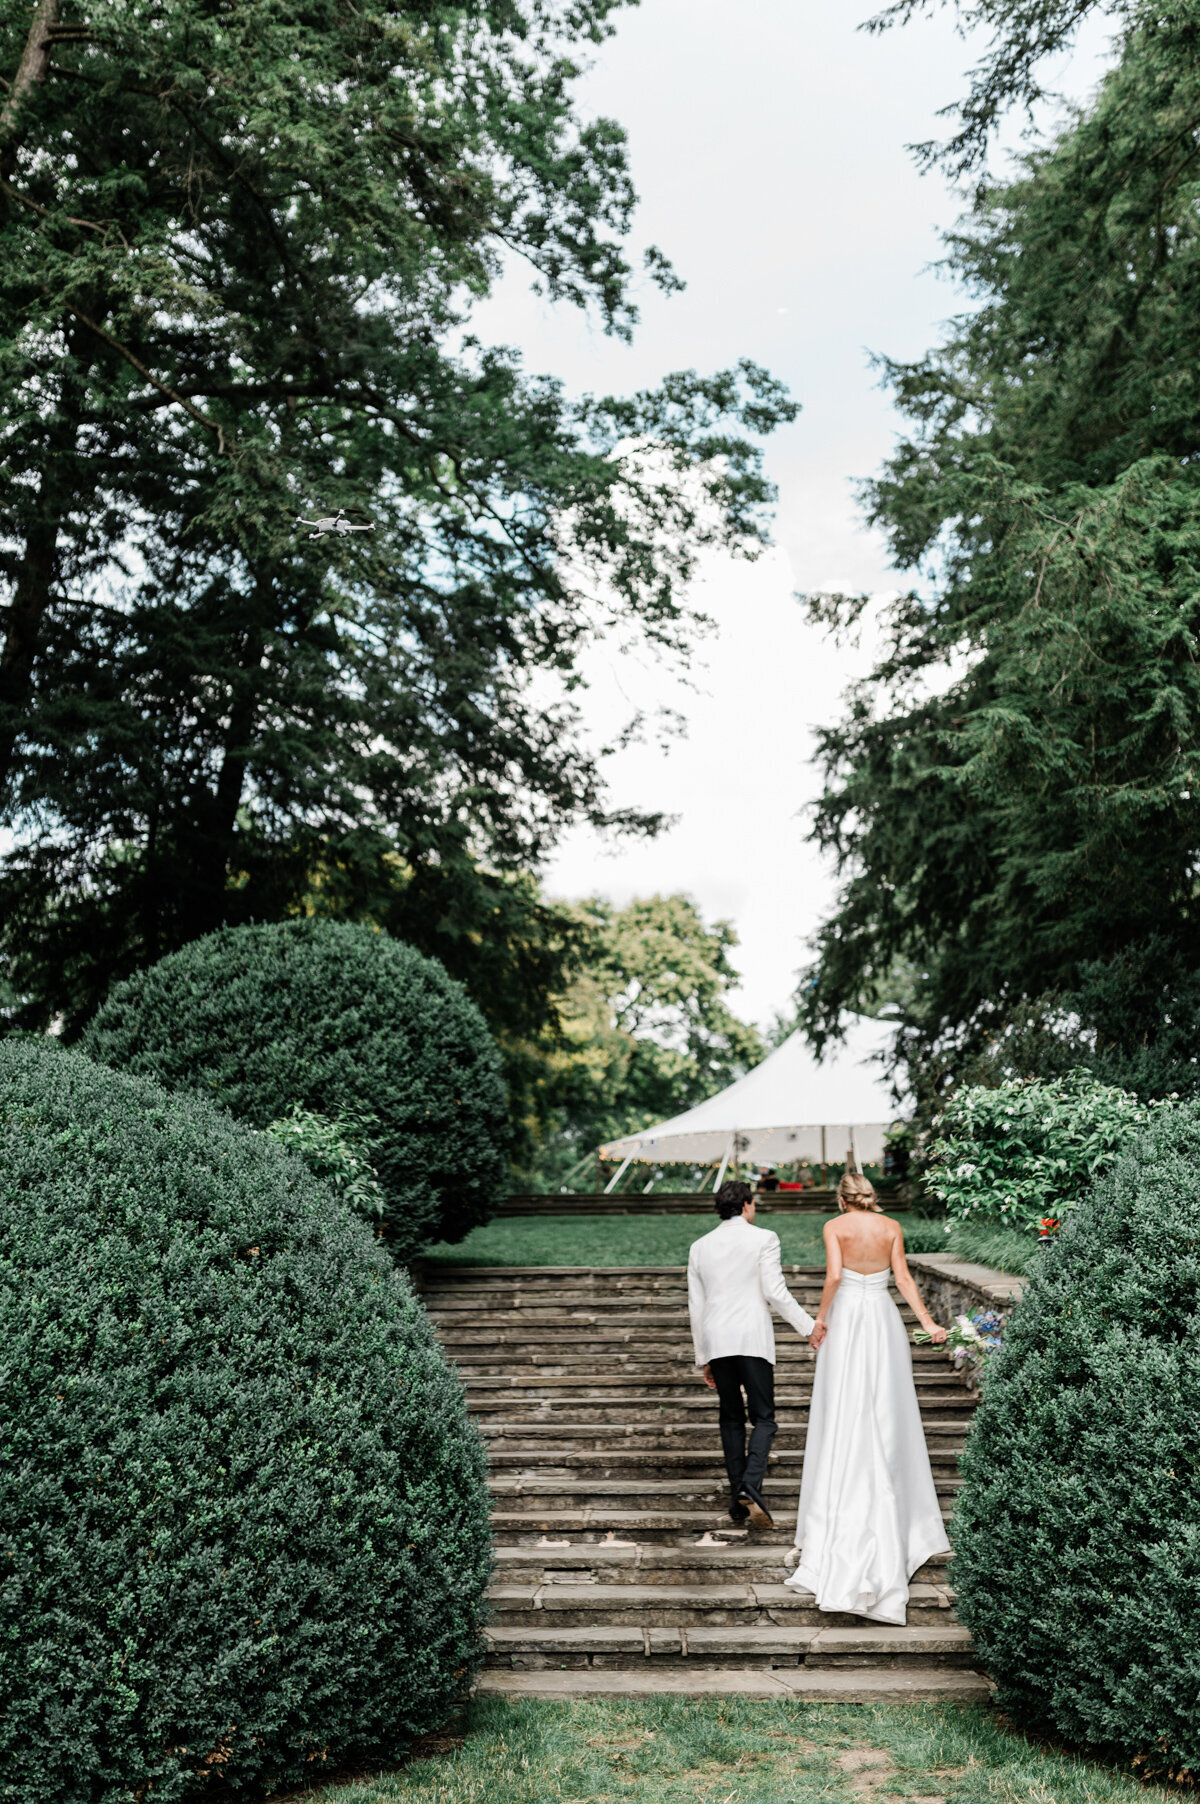 Romantic European Destinations: Enchanting Backdrops for Luxury Weddings. Allow us to transport you to the most romantic destinations in Europe, where your love story unfolds.